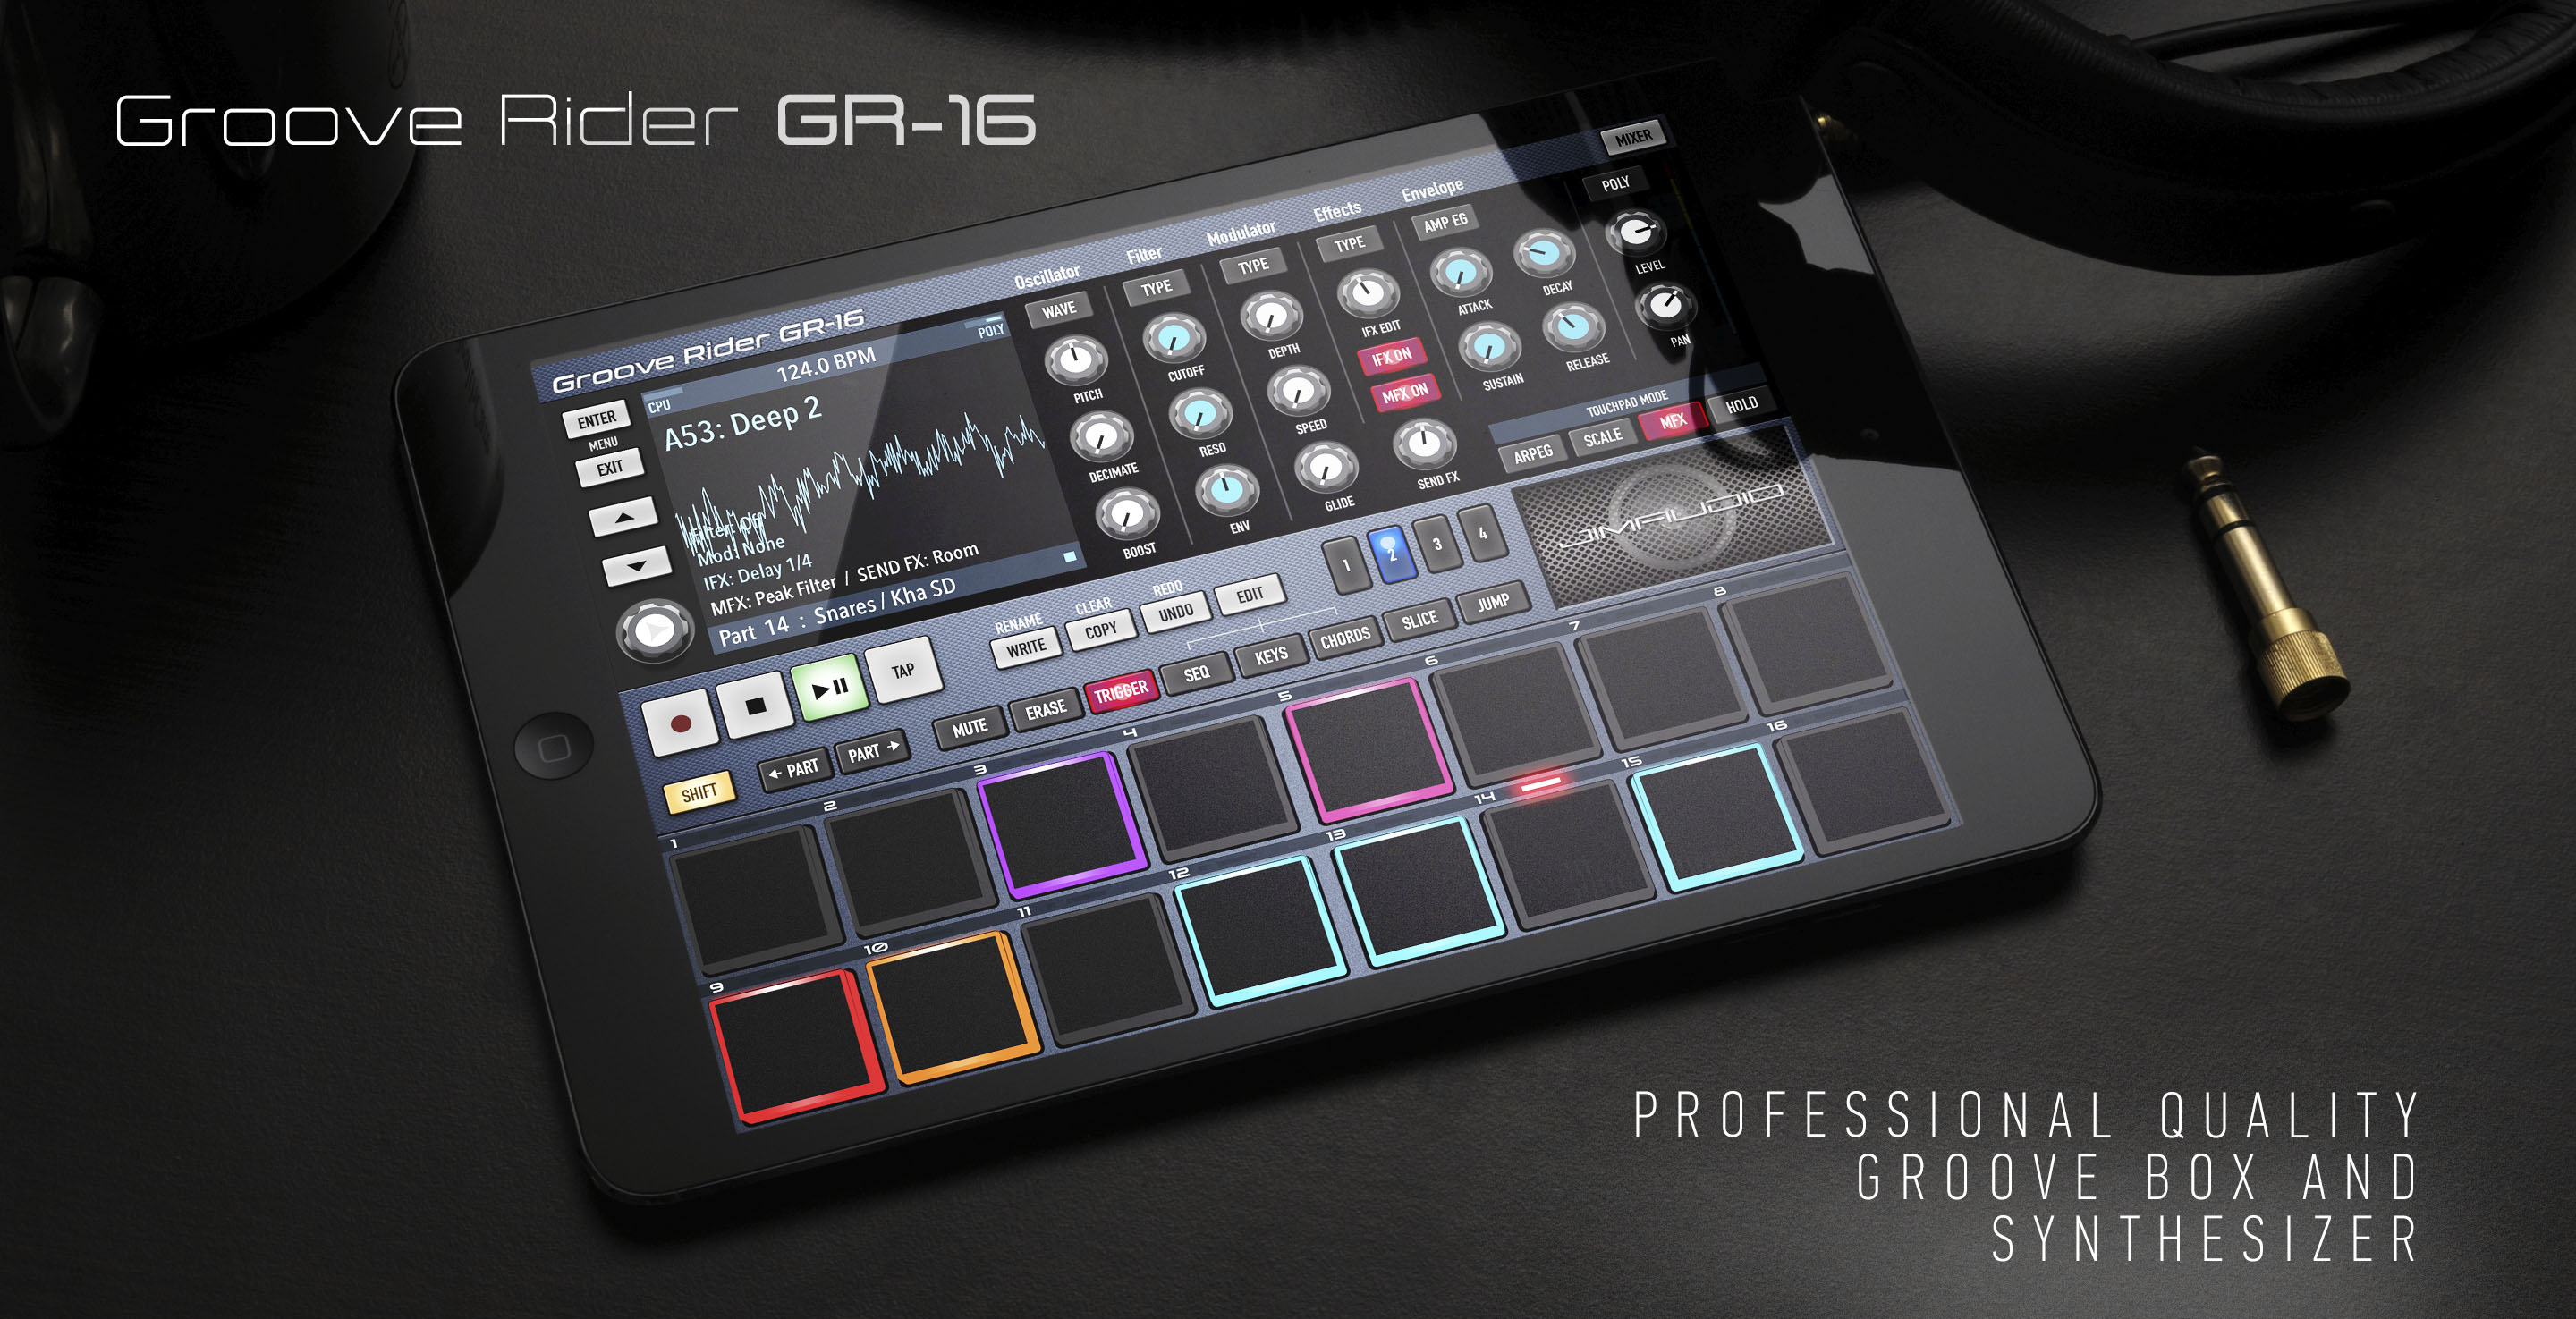 Groove Rider GR-16: a professional groove box, inspired by professional hardware drum machines and rhythm boxes